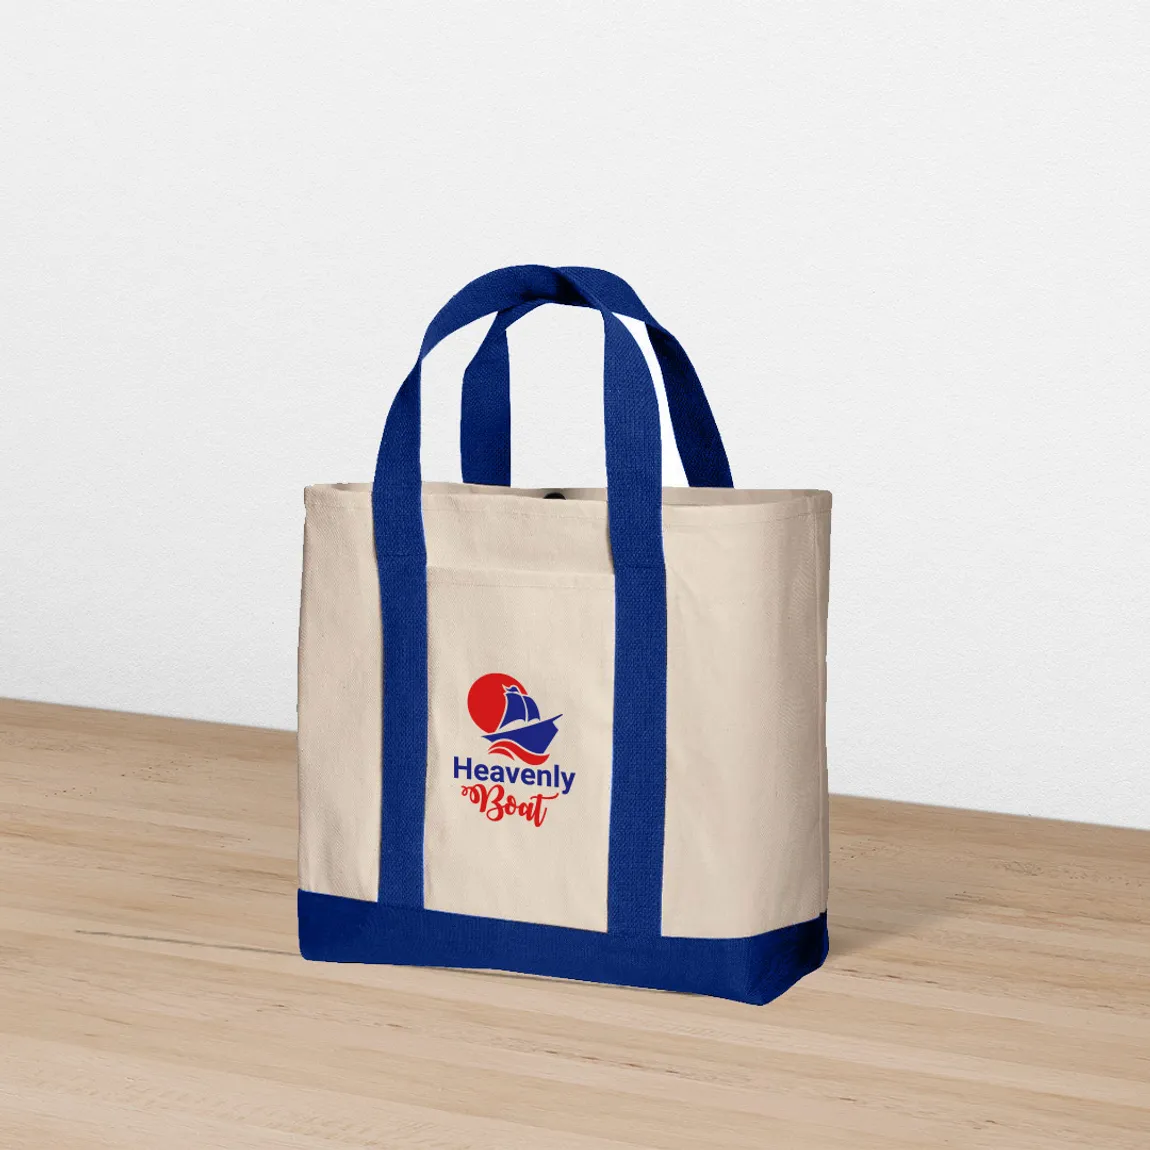 Tote Bags - Two Tone Cotton Canvas